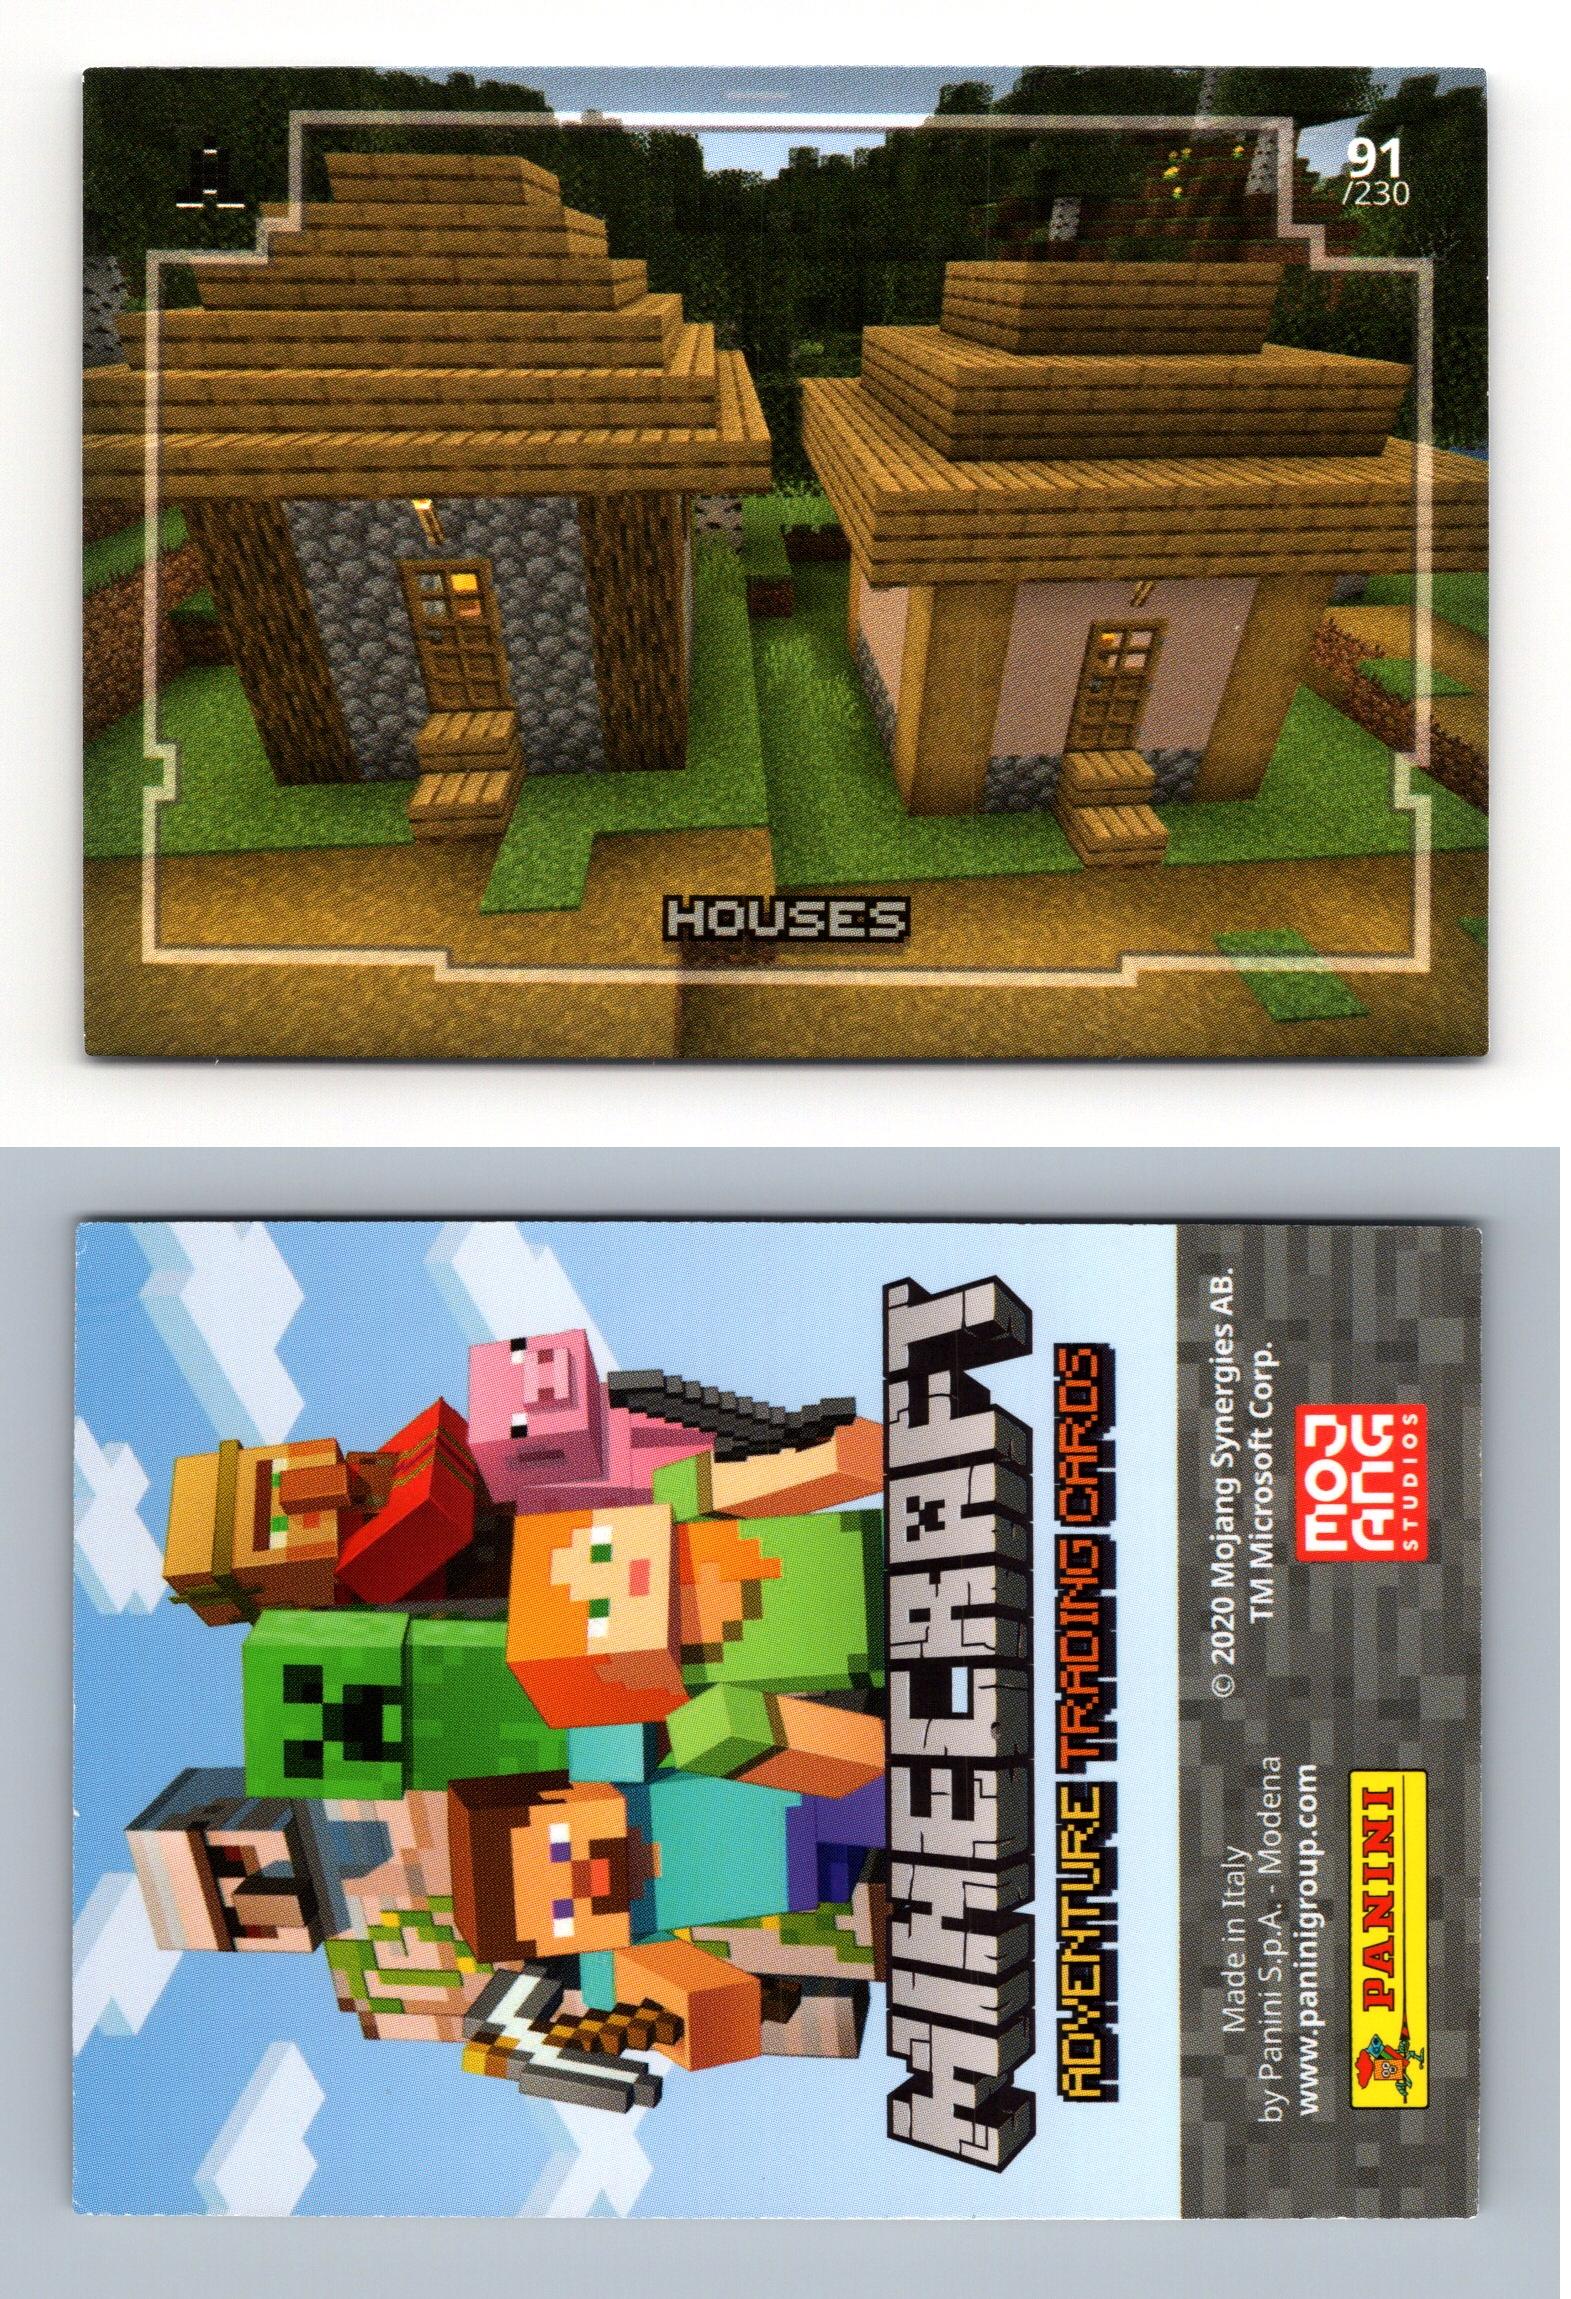 Panini Minecraft Adventure Trading Cards Card No. 19 Ender Dragon